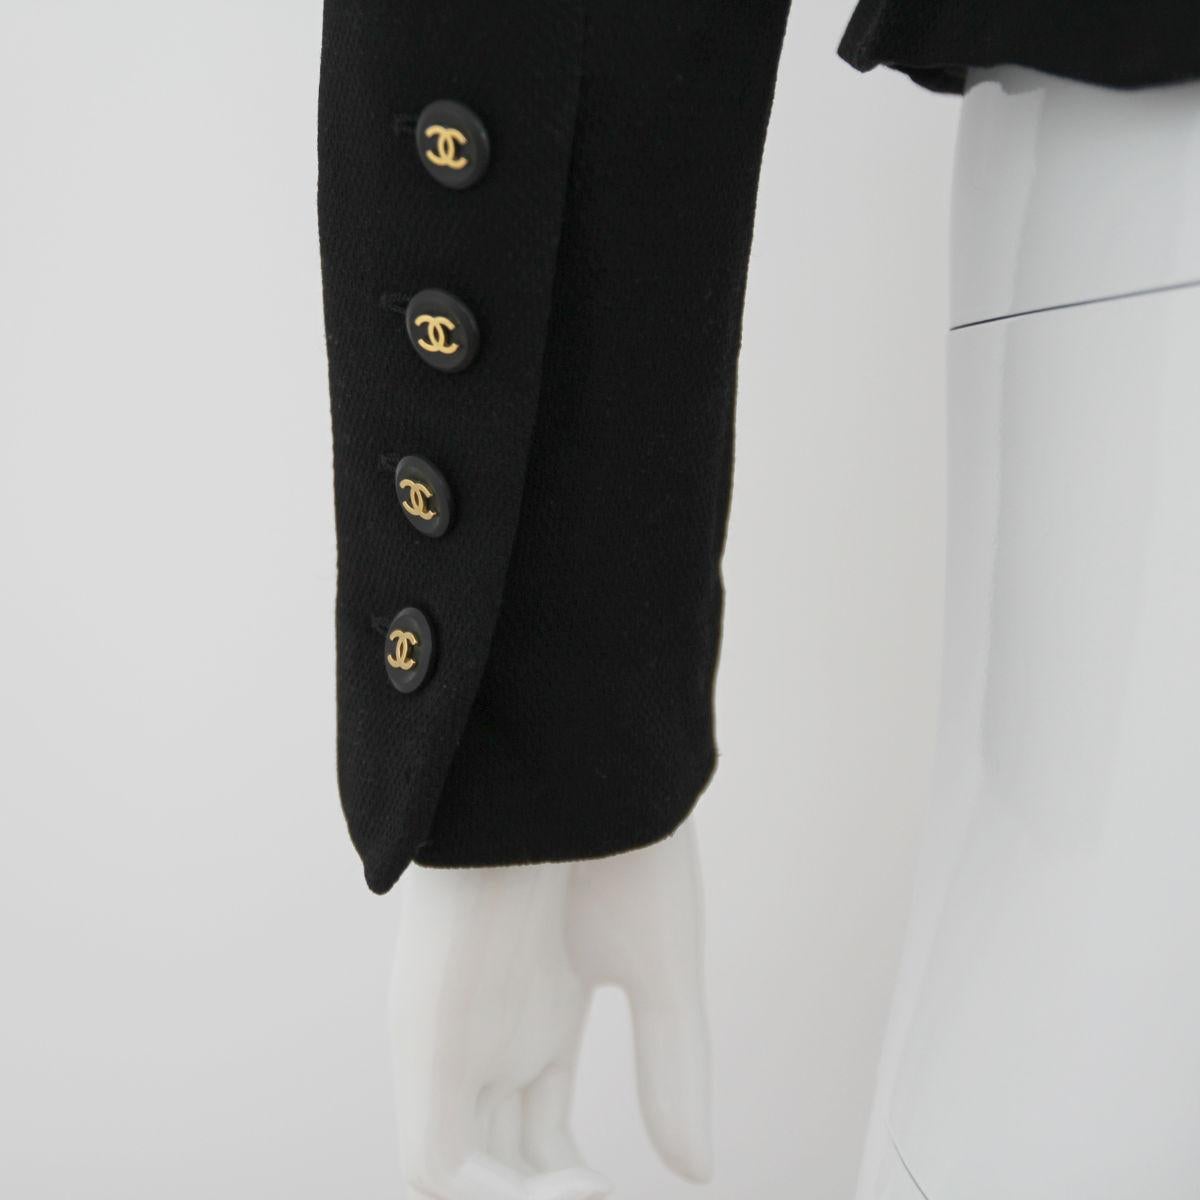 CHANEL 1995 Black Jacket with Patent Leather Belt & CC Buttons by Karl Lagerfeld 4